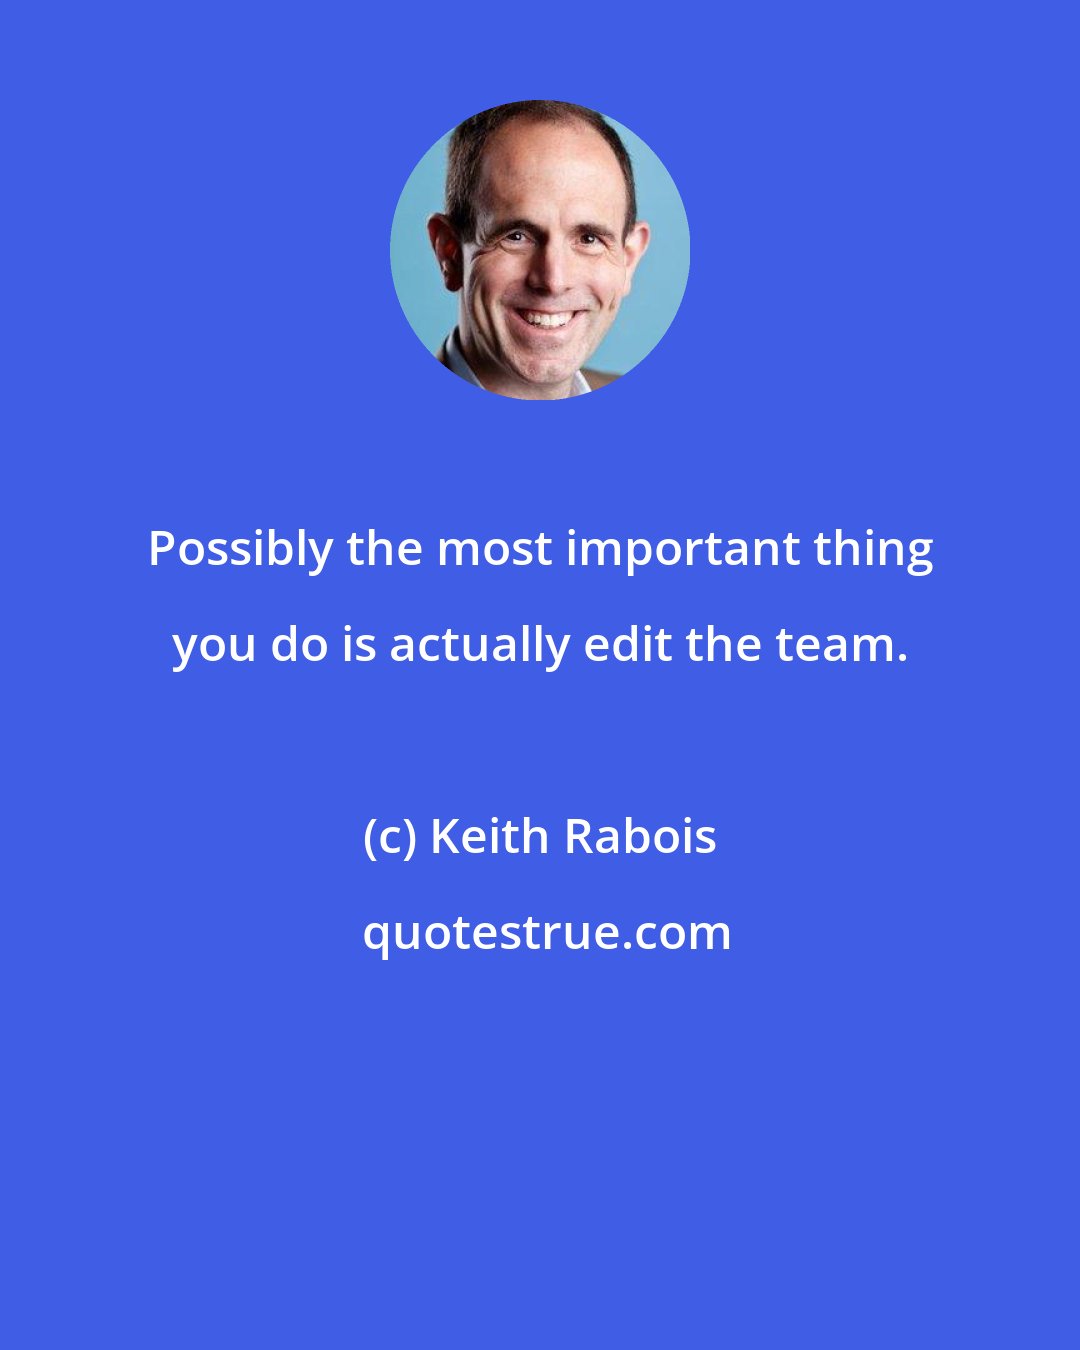 Keith Rabois: Possibly the most important thing you do is actually edit the team.